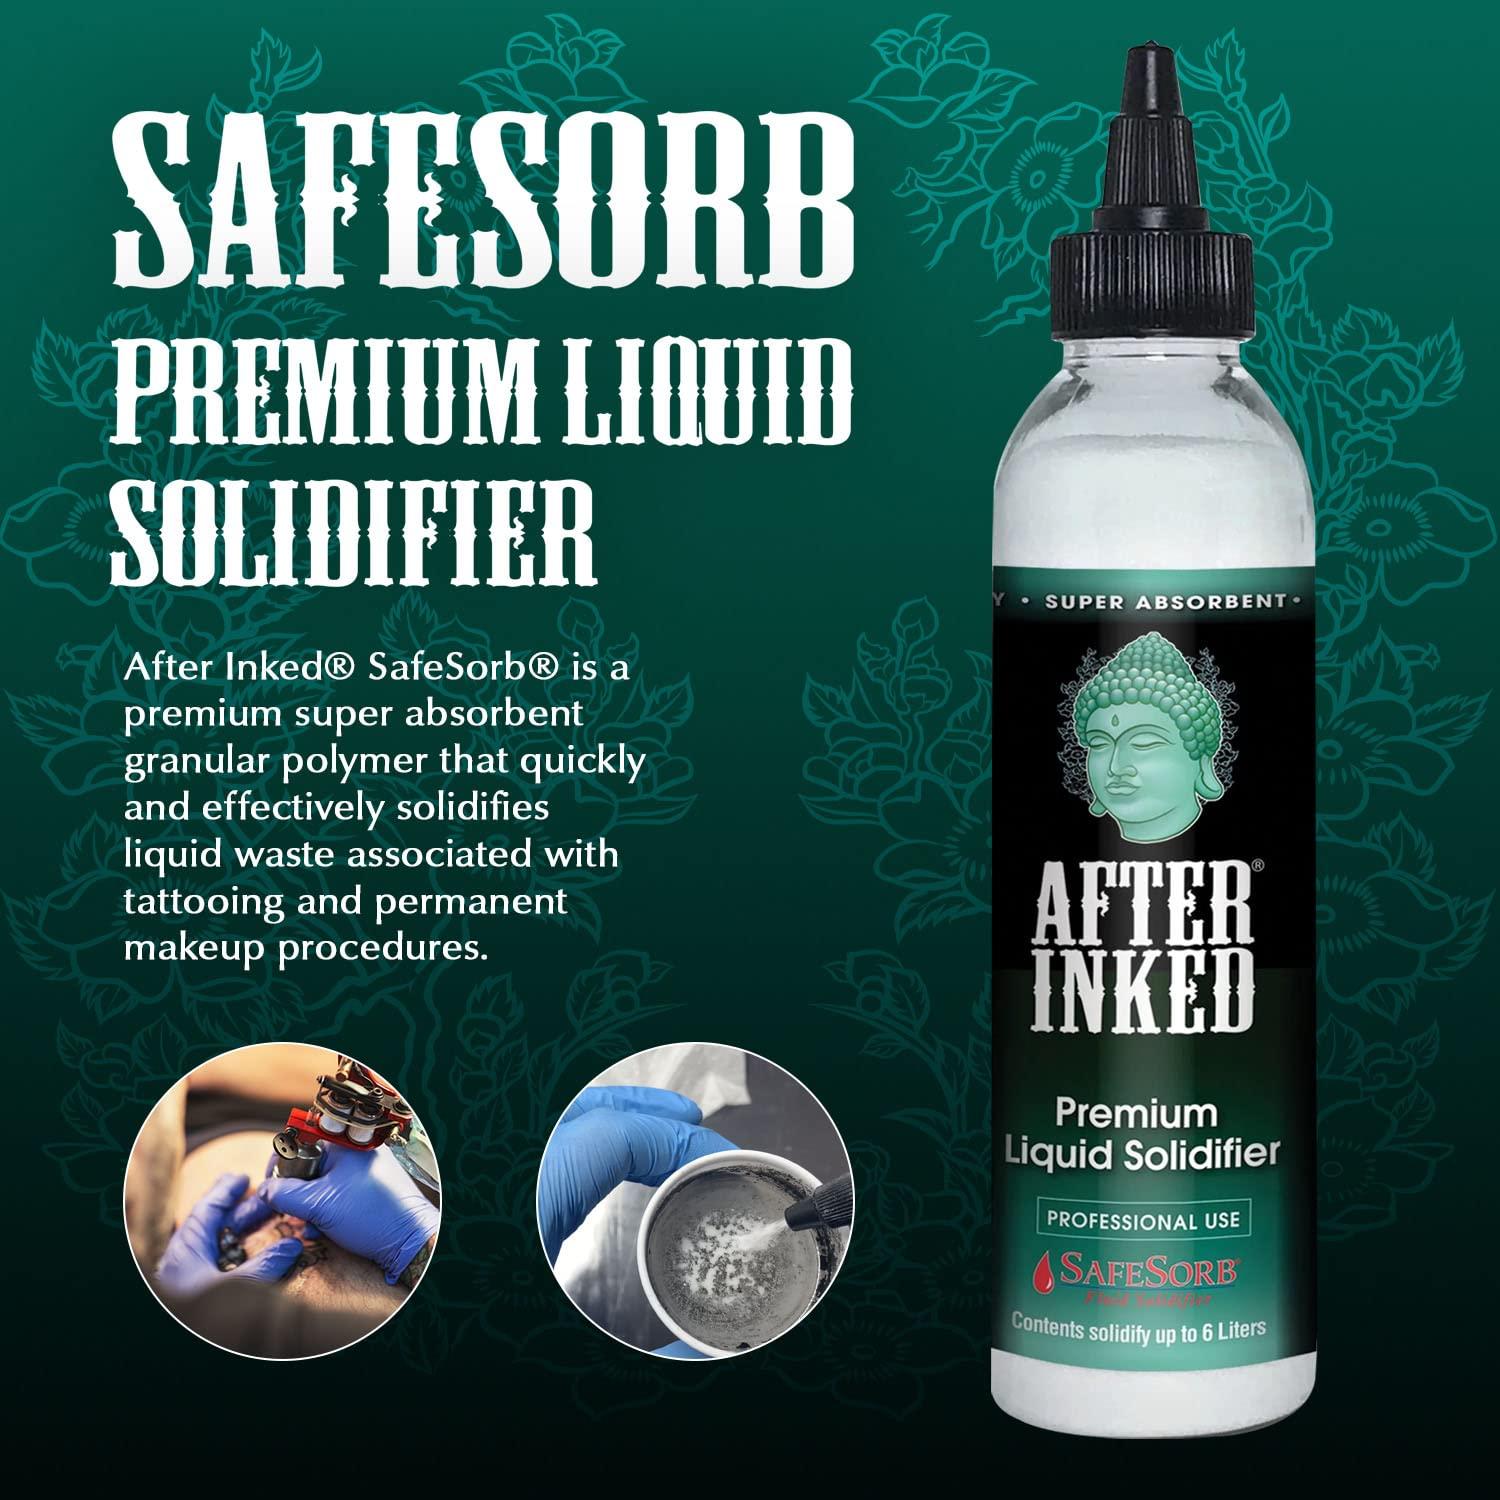 After Inked Liquid Solidifier - Quick & Super Absorbent Tattoo Ink  Solidifier Polymer Powder, Paint Hardener for Disposal, Easy & Convenient  to Use Liquid Tattoo Solidifier for Cleaning - 1 pc, 6 oz